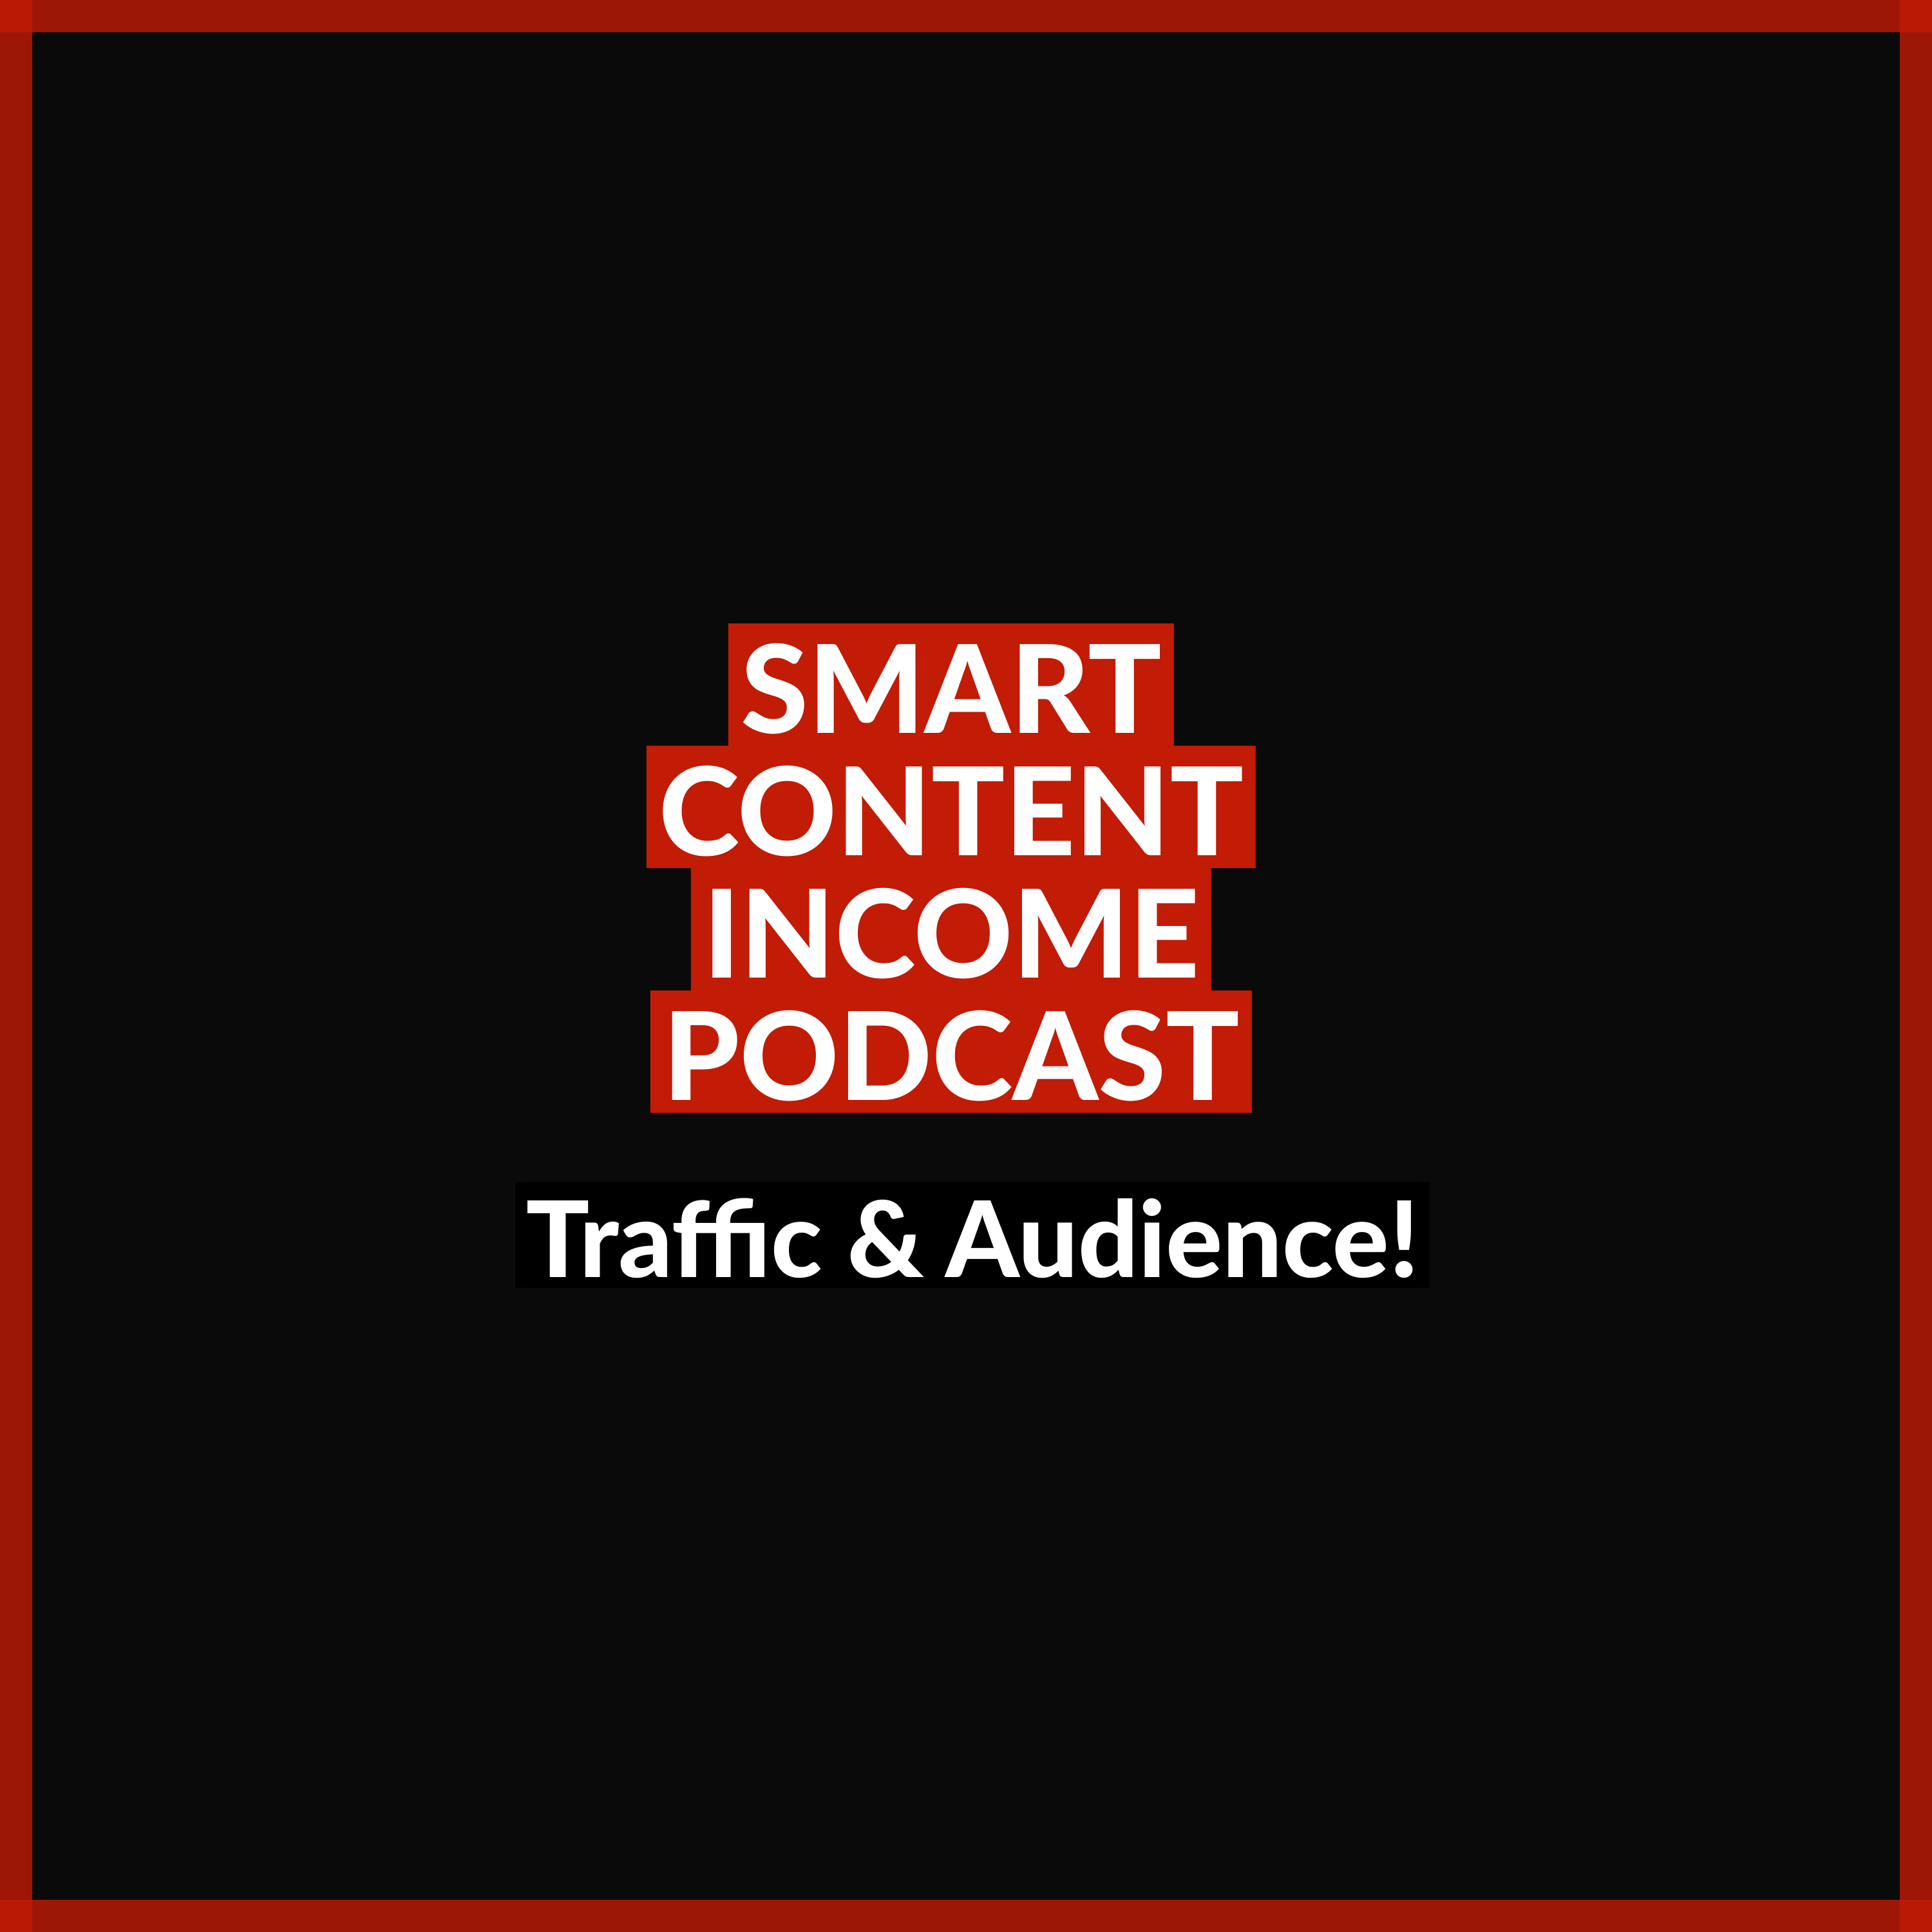 Artwork for podcast Smart Content Income Podcast